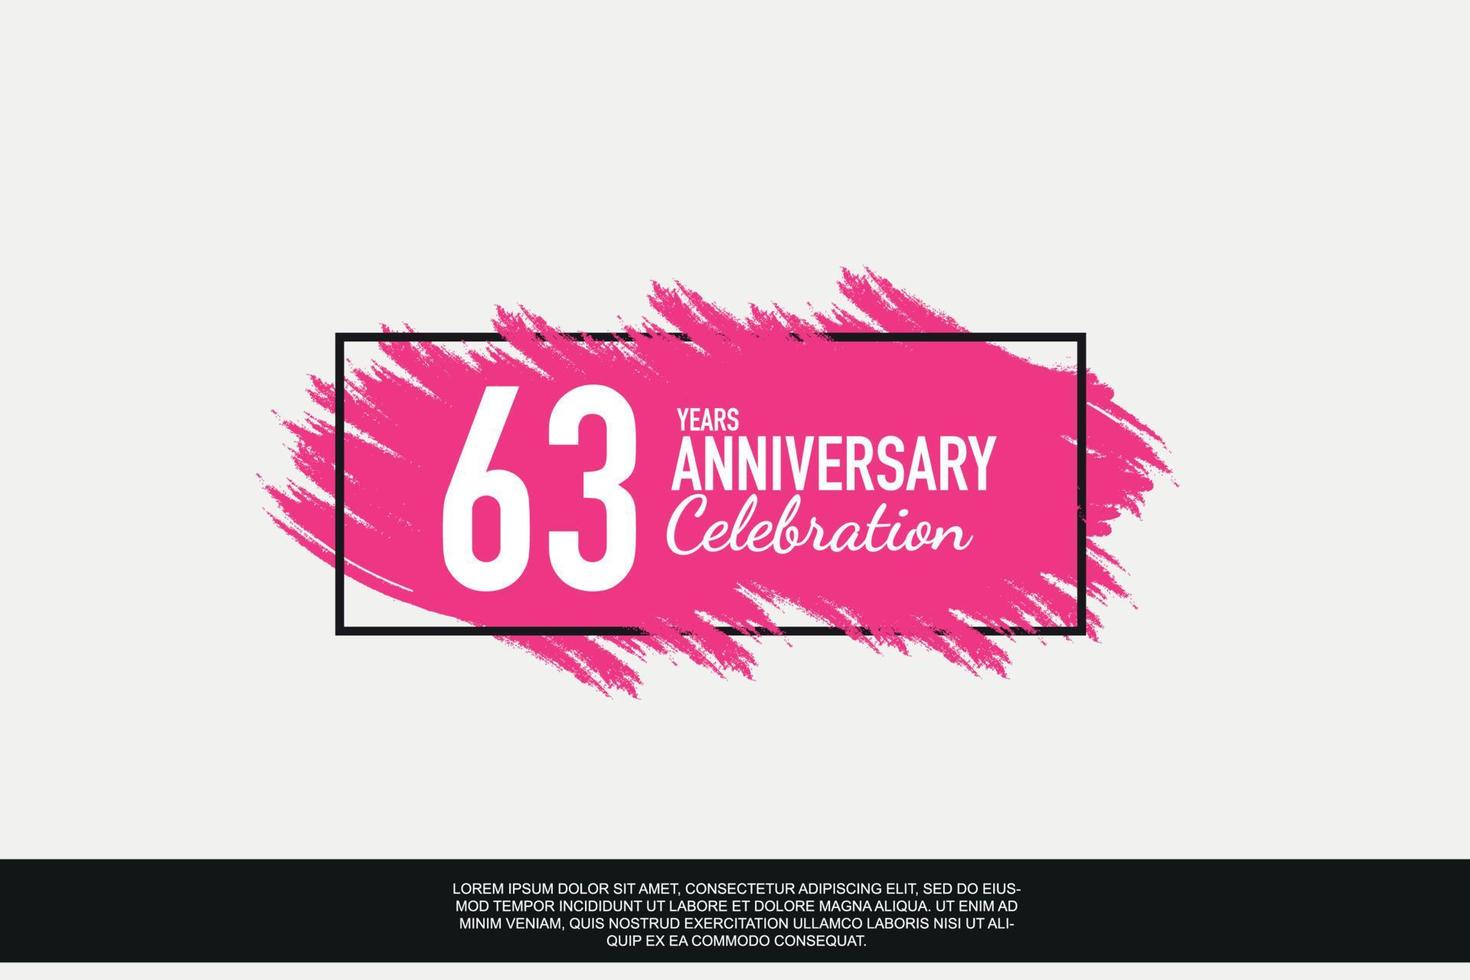 63 year anniversary celebration vector pink design in black frame on white background abstract illustration logo